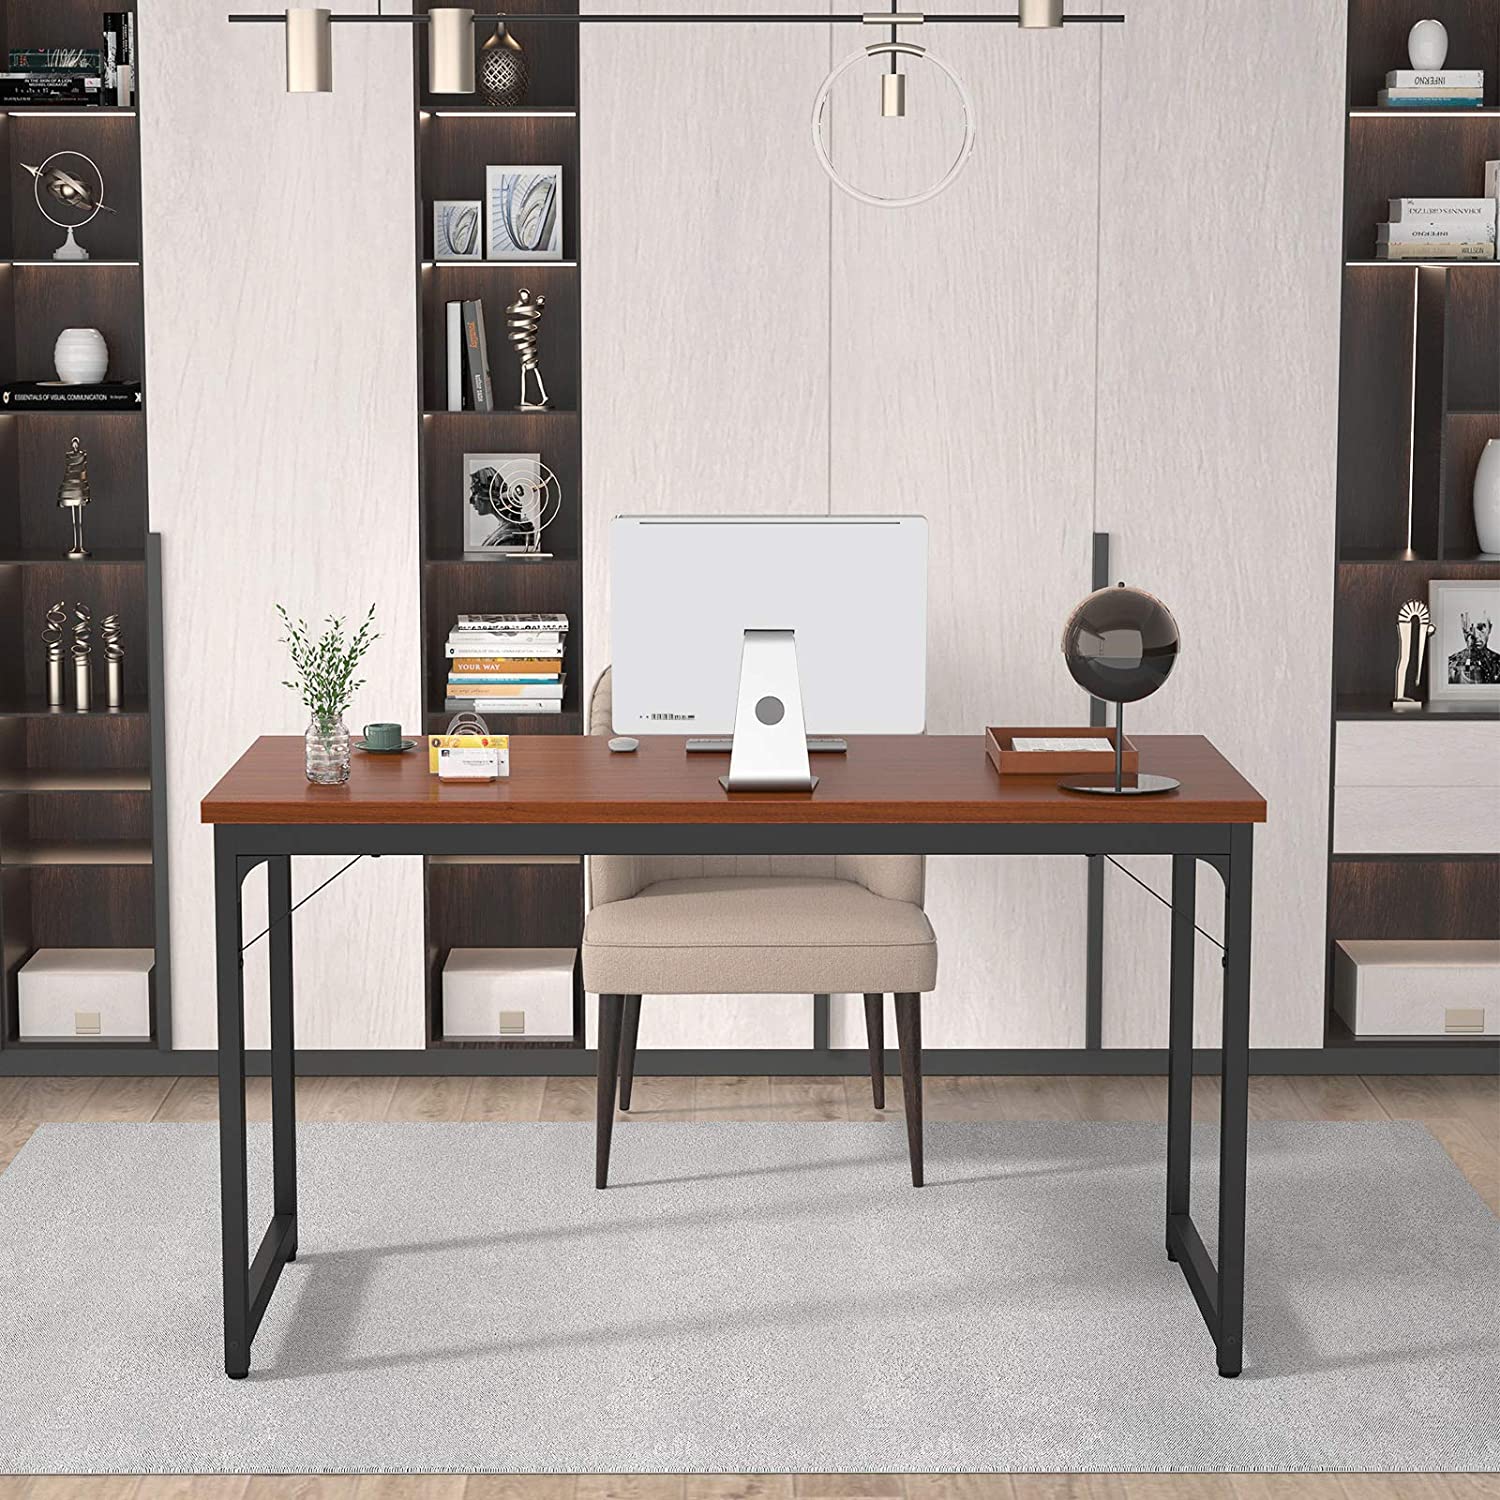 Study Tables : Modern PC Laptop Notebook Study Writing Table for Home Office